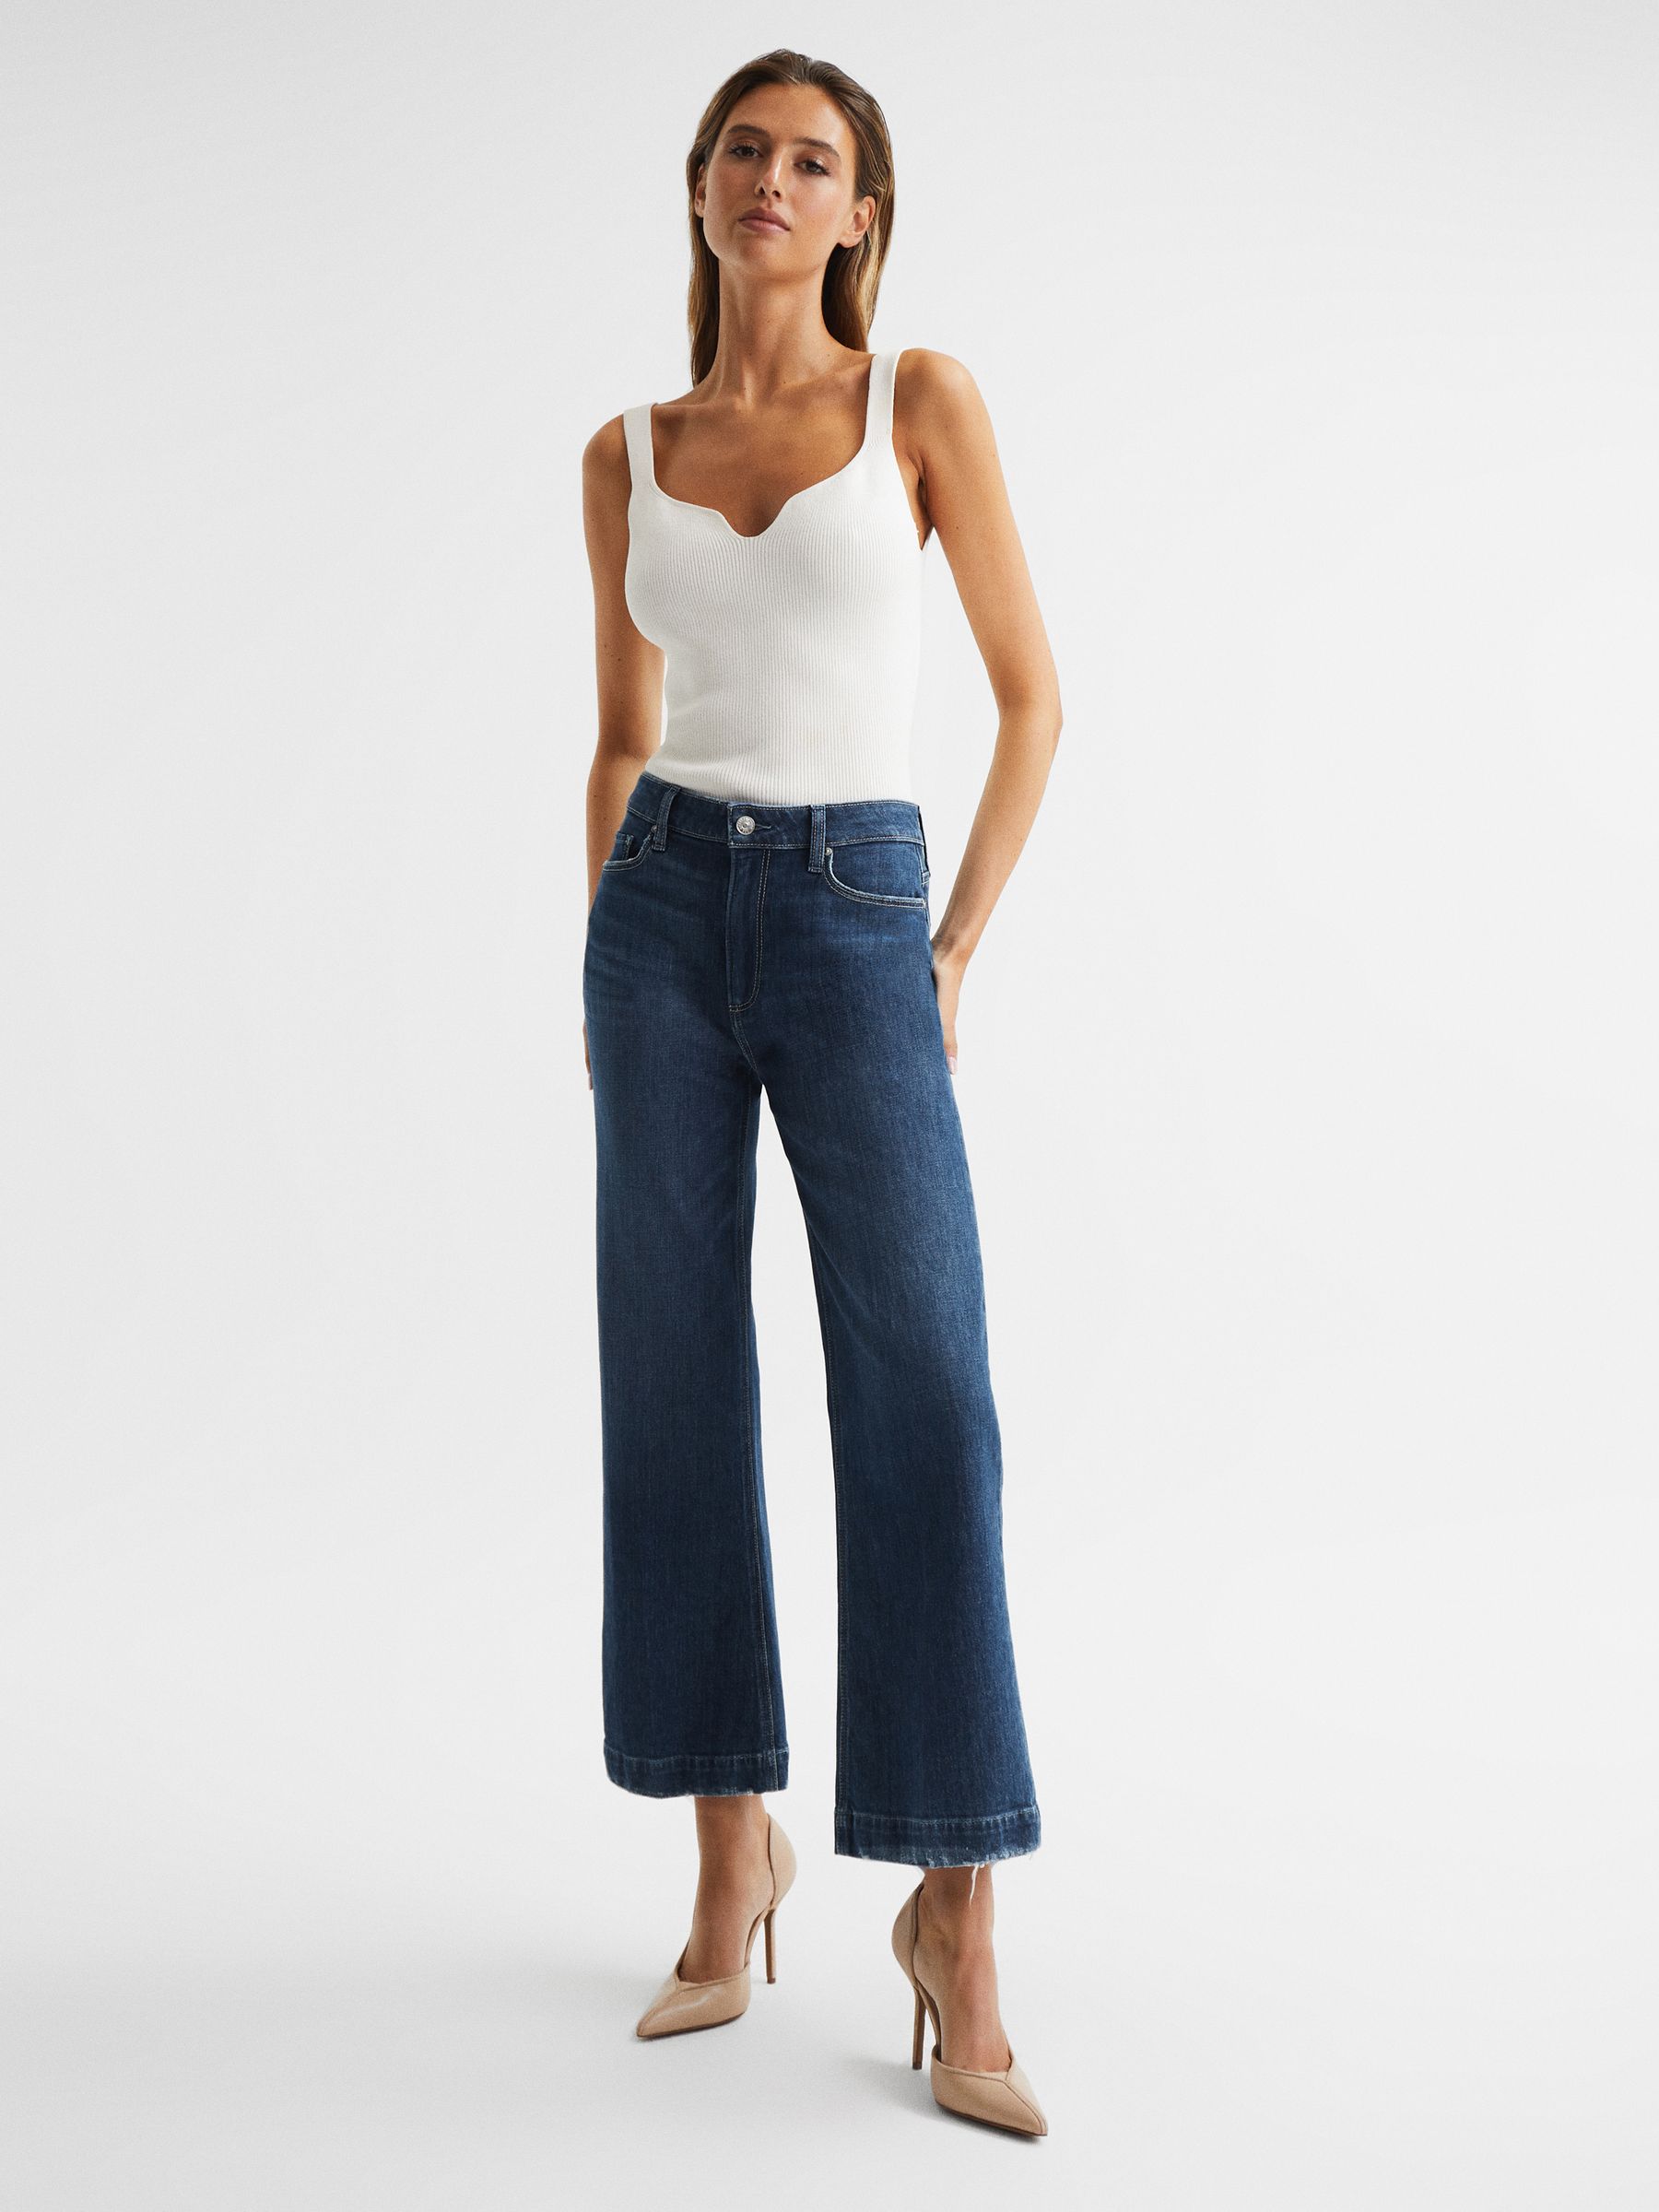 Reiss Leenah Ankle PAIGE High Rise Crop Flared Jeans - REISS